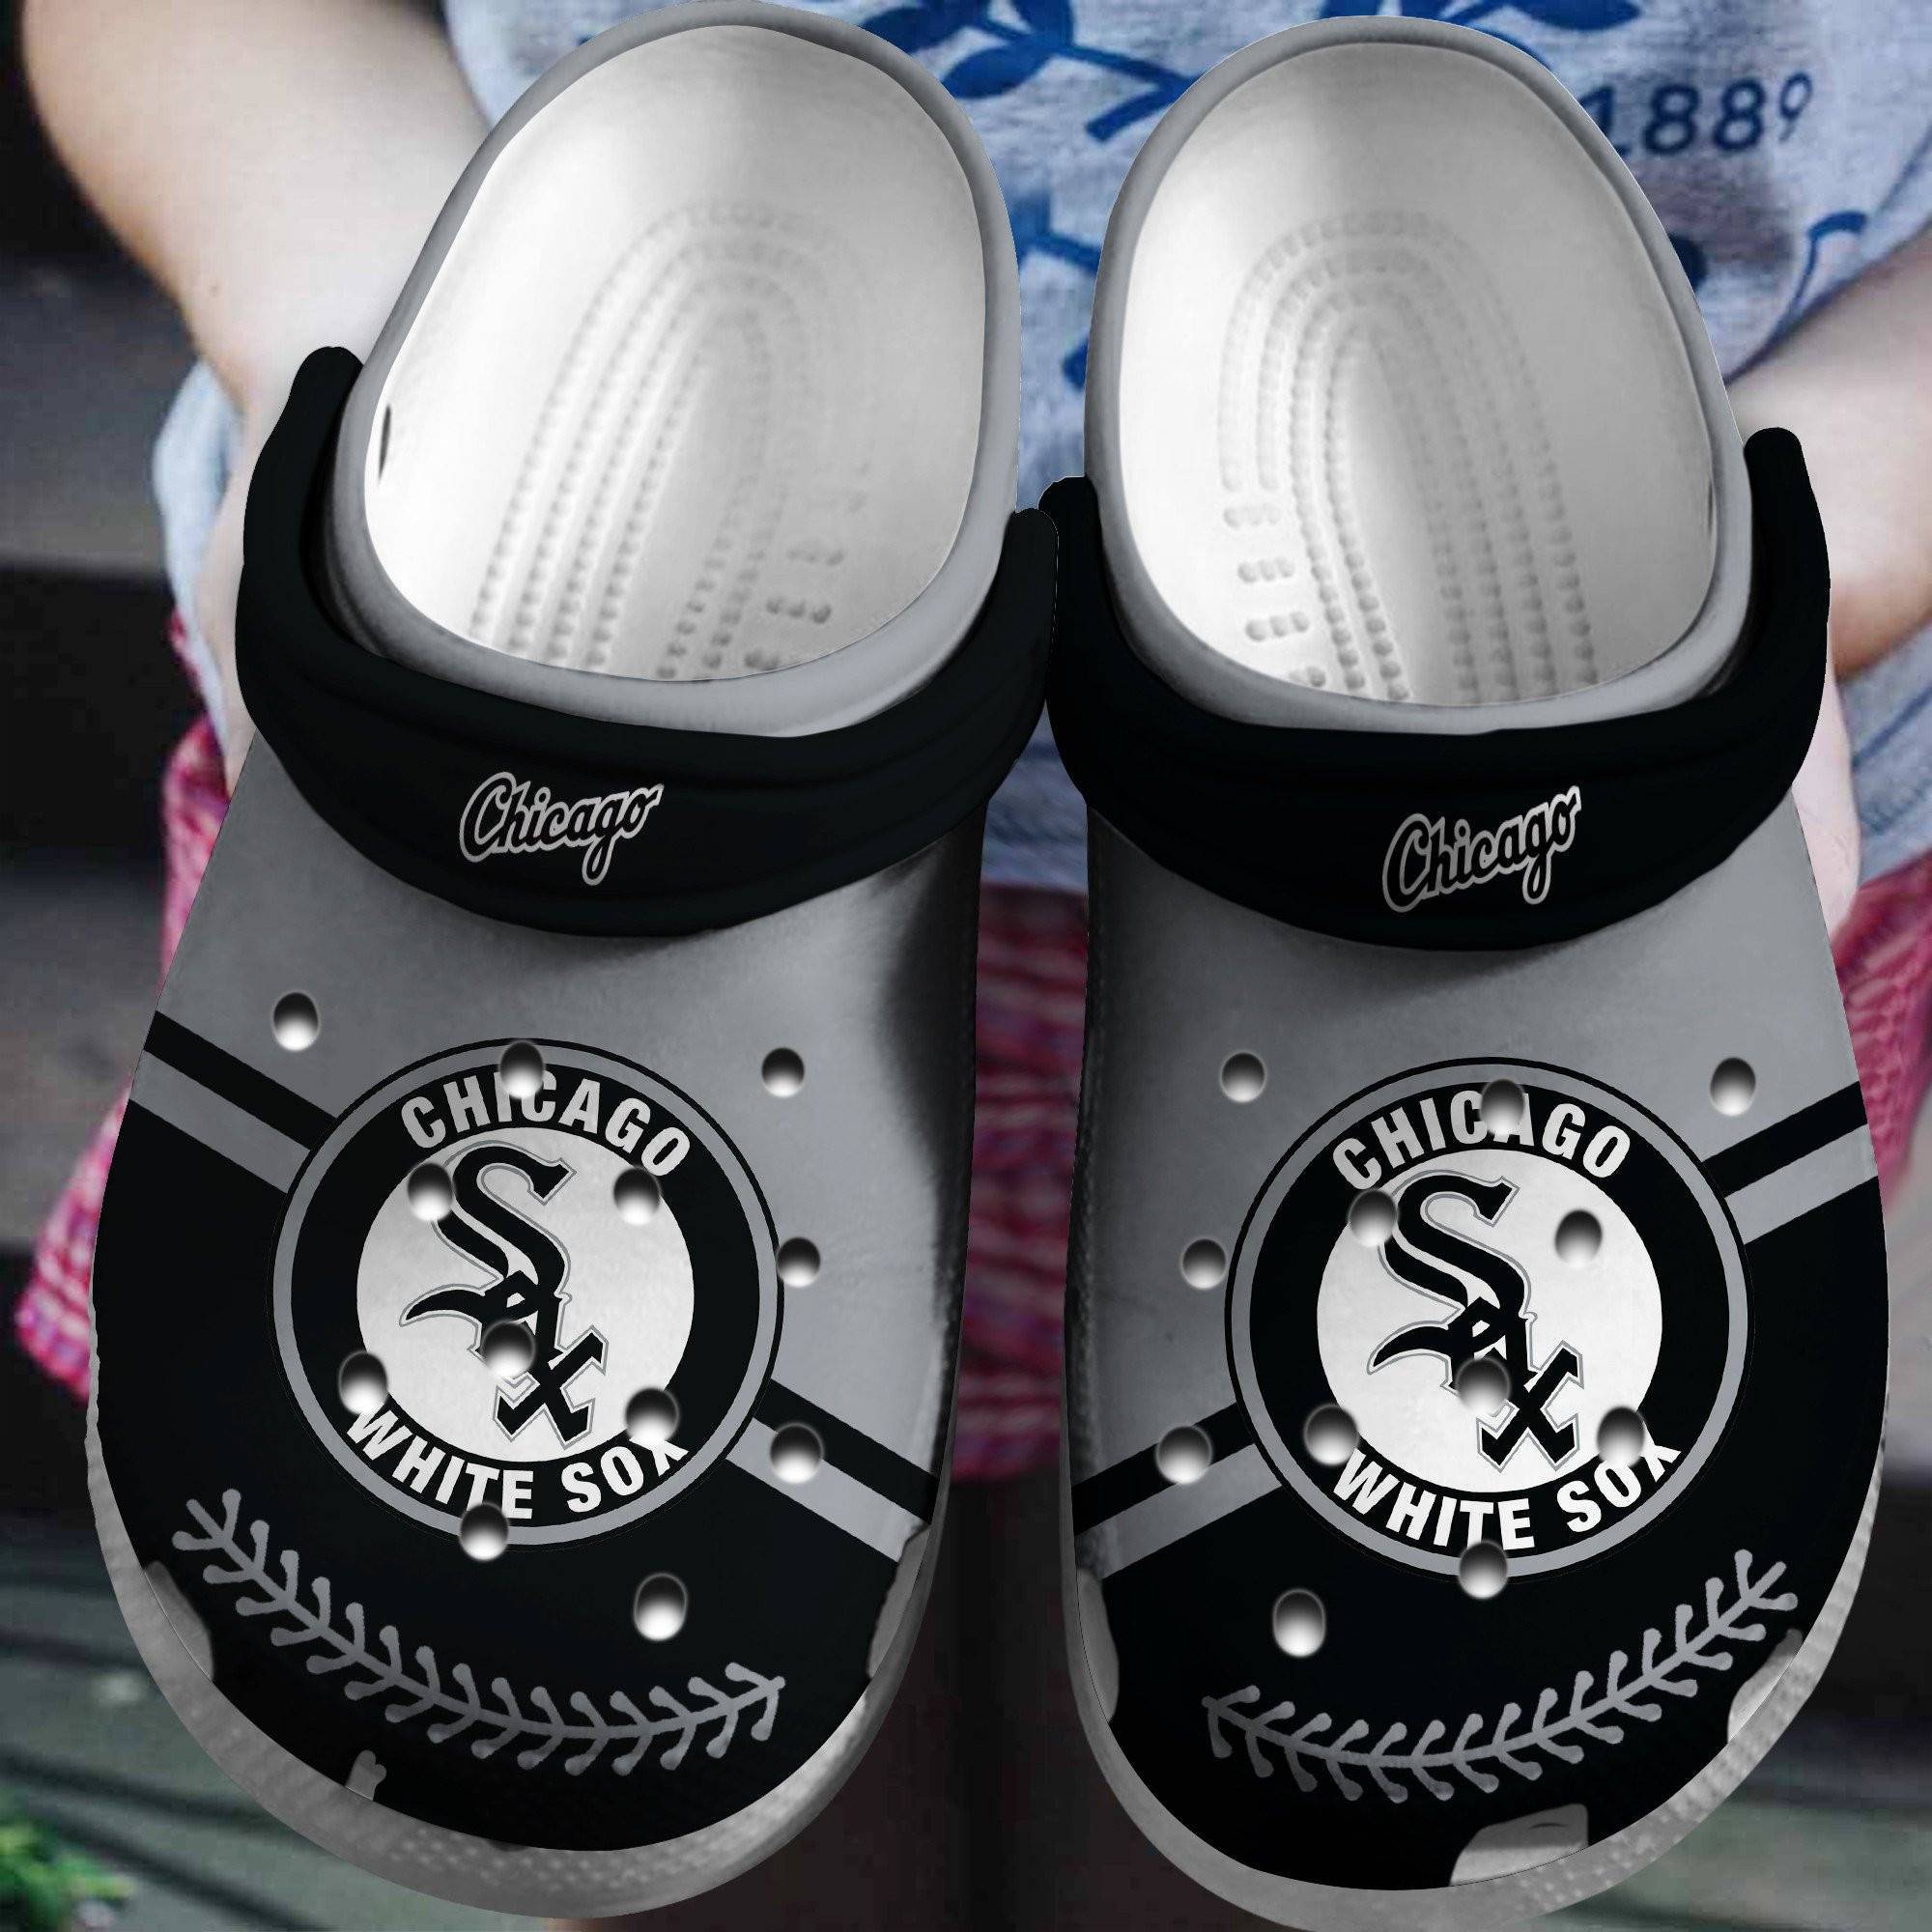 Hot Mlb Team Chicago White Sox Grey – Black Crocss Clog Shoesshoes Trusted Shopping Online In The World